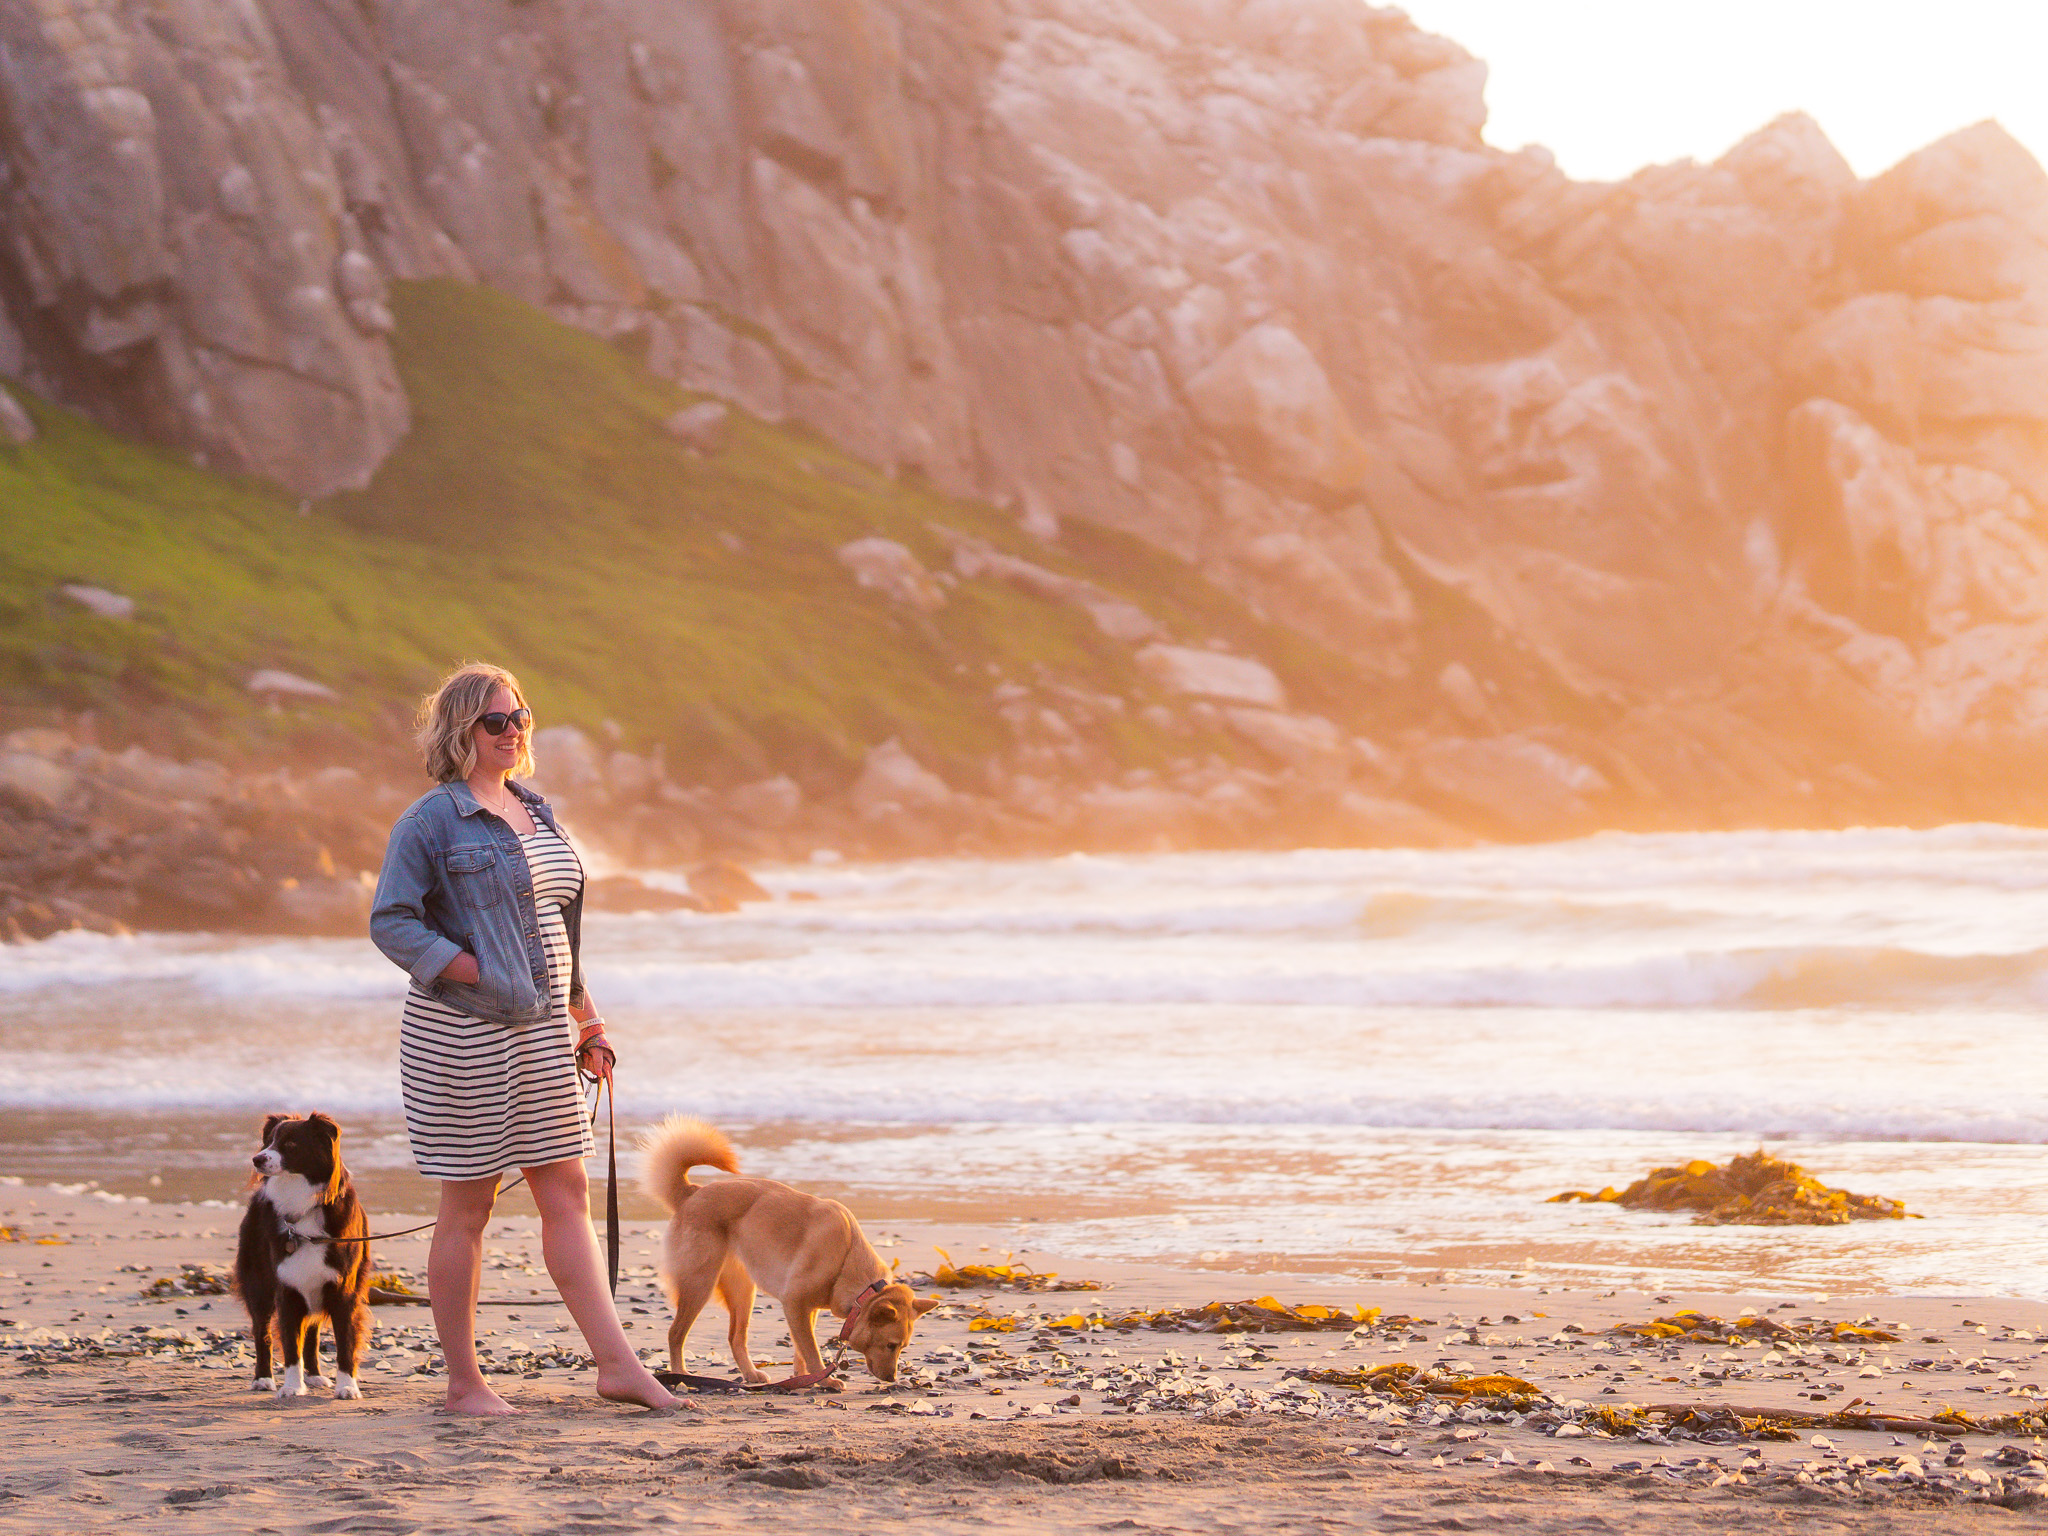 Blair stands on the beach at Morro Bay in San Luis Obispo, California with her two dogs: June, a yellow mutt, and Margot, a red and white Australian Shepherd.